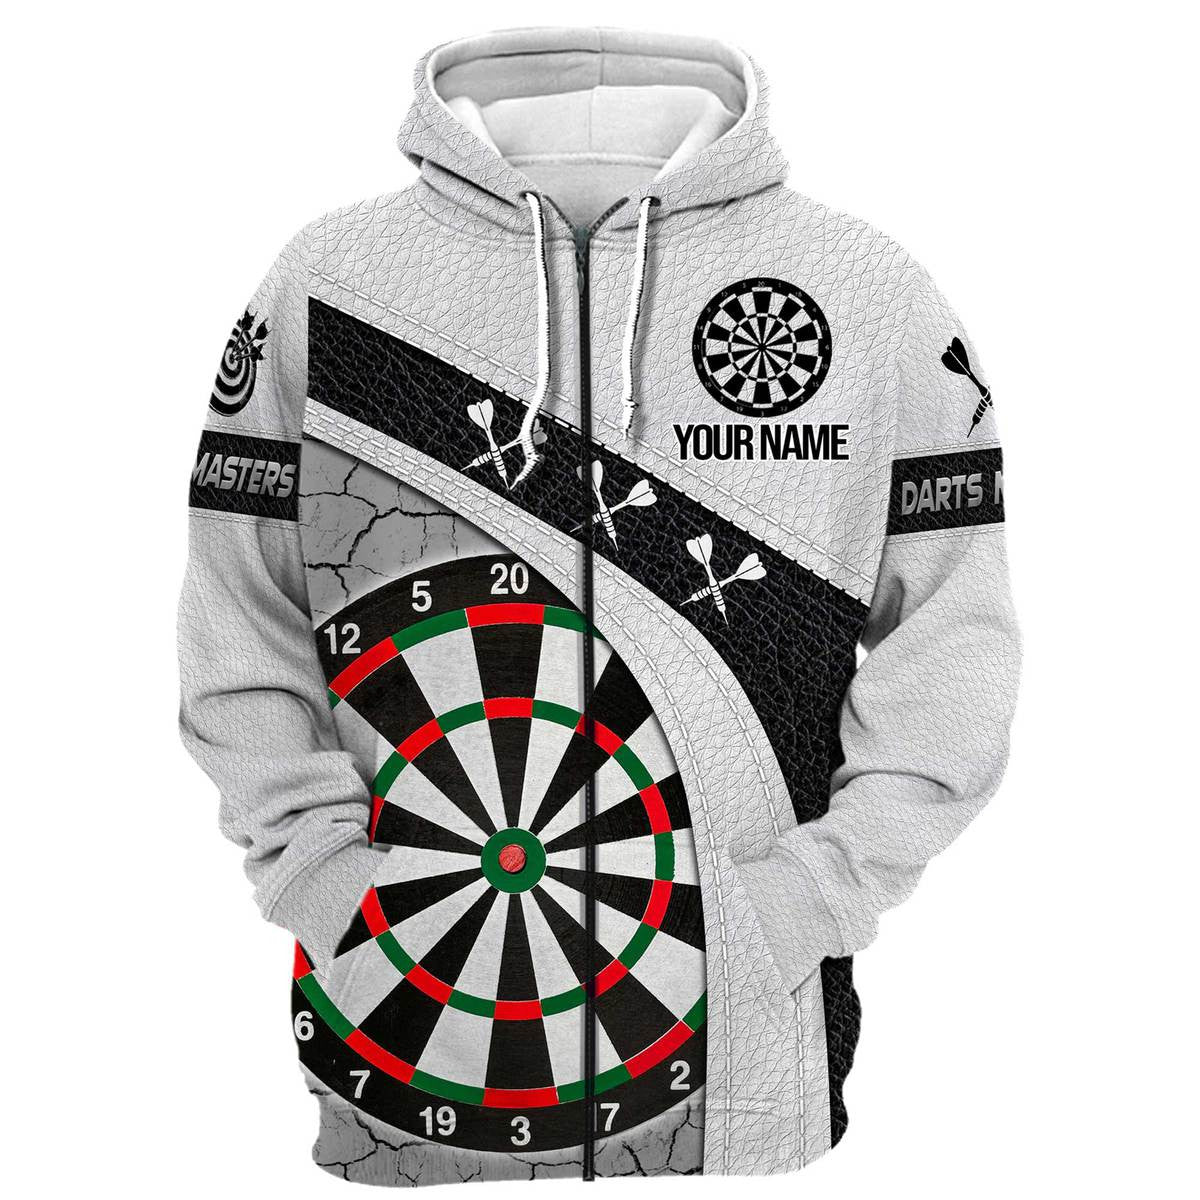 Personalized Name Darts Player Black and White Leather All Over Printed Unisex Hoodie Zip Hoodie Shirt